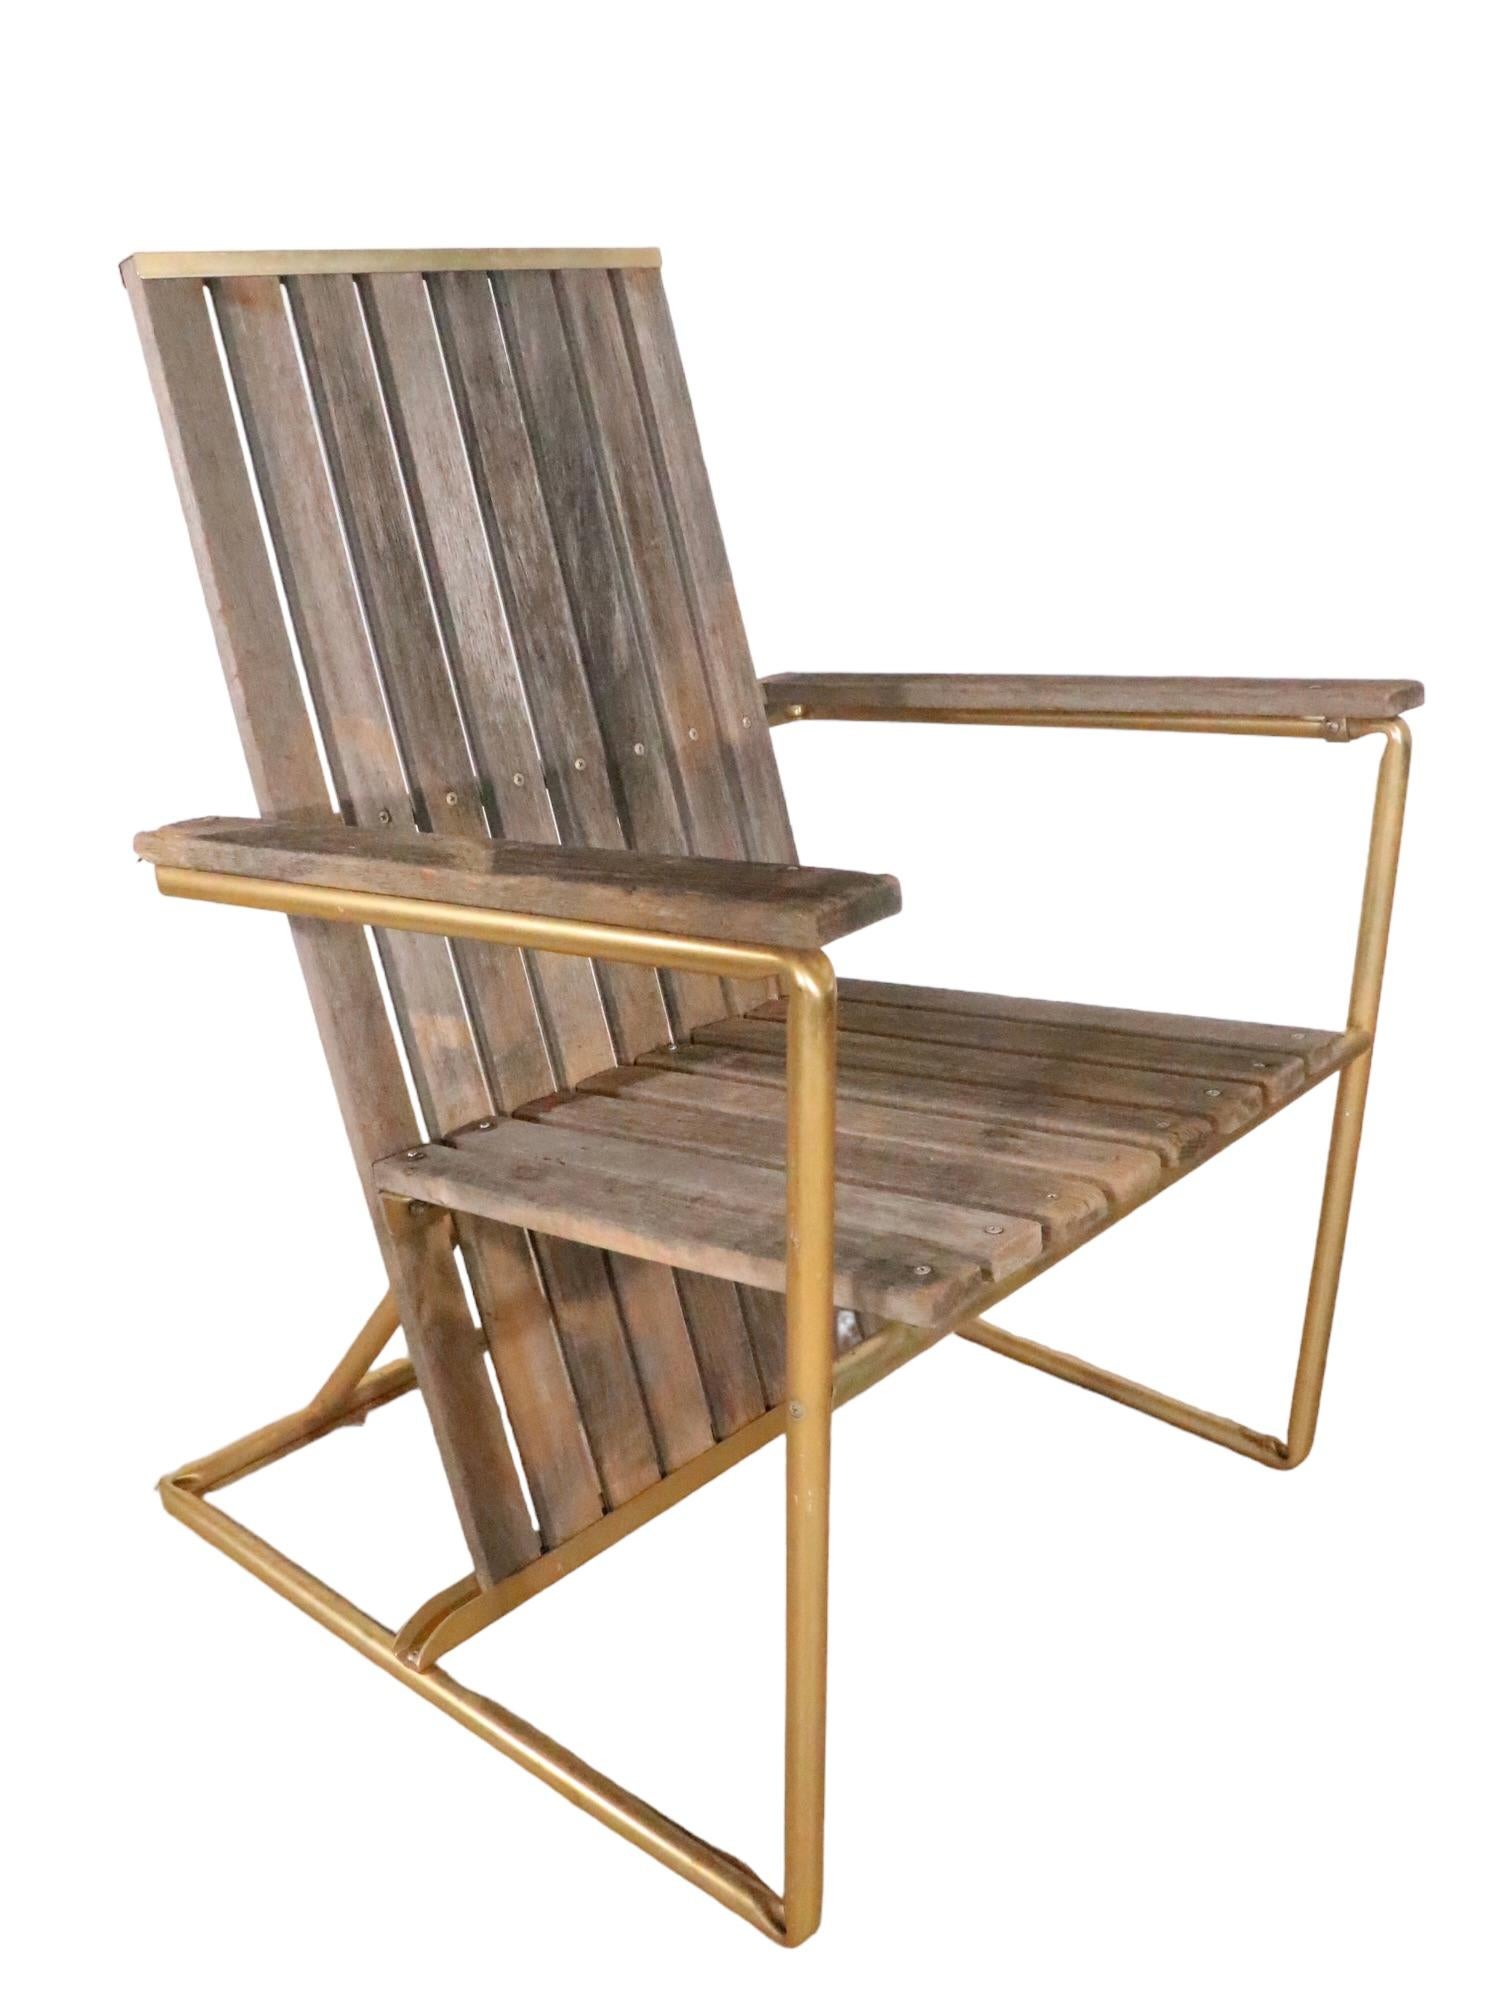 Vintage Garden Patio Poolside Lounge Chair circa 1970's For Sale 12